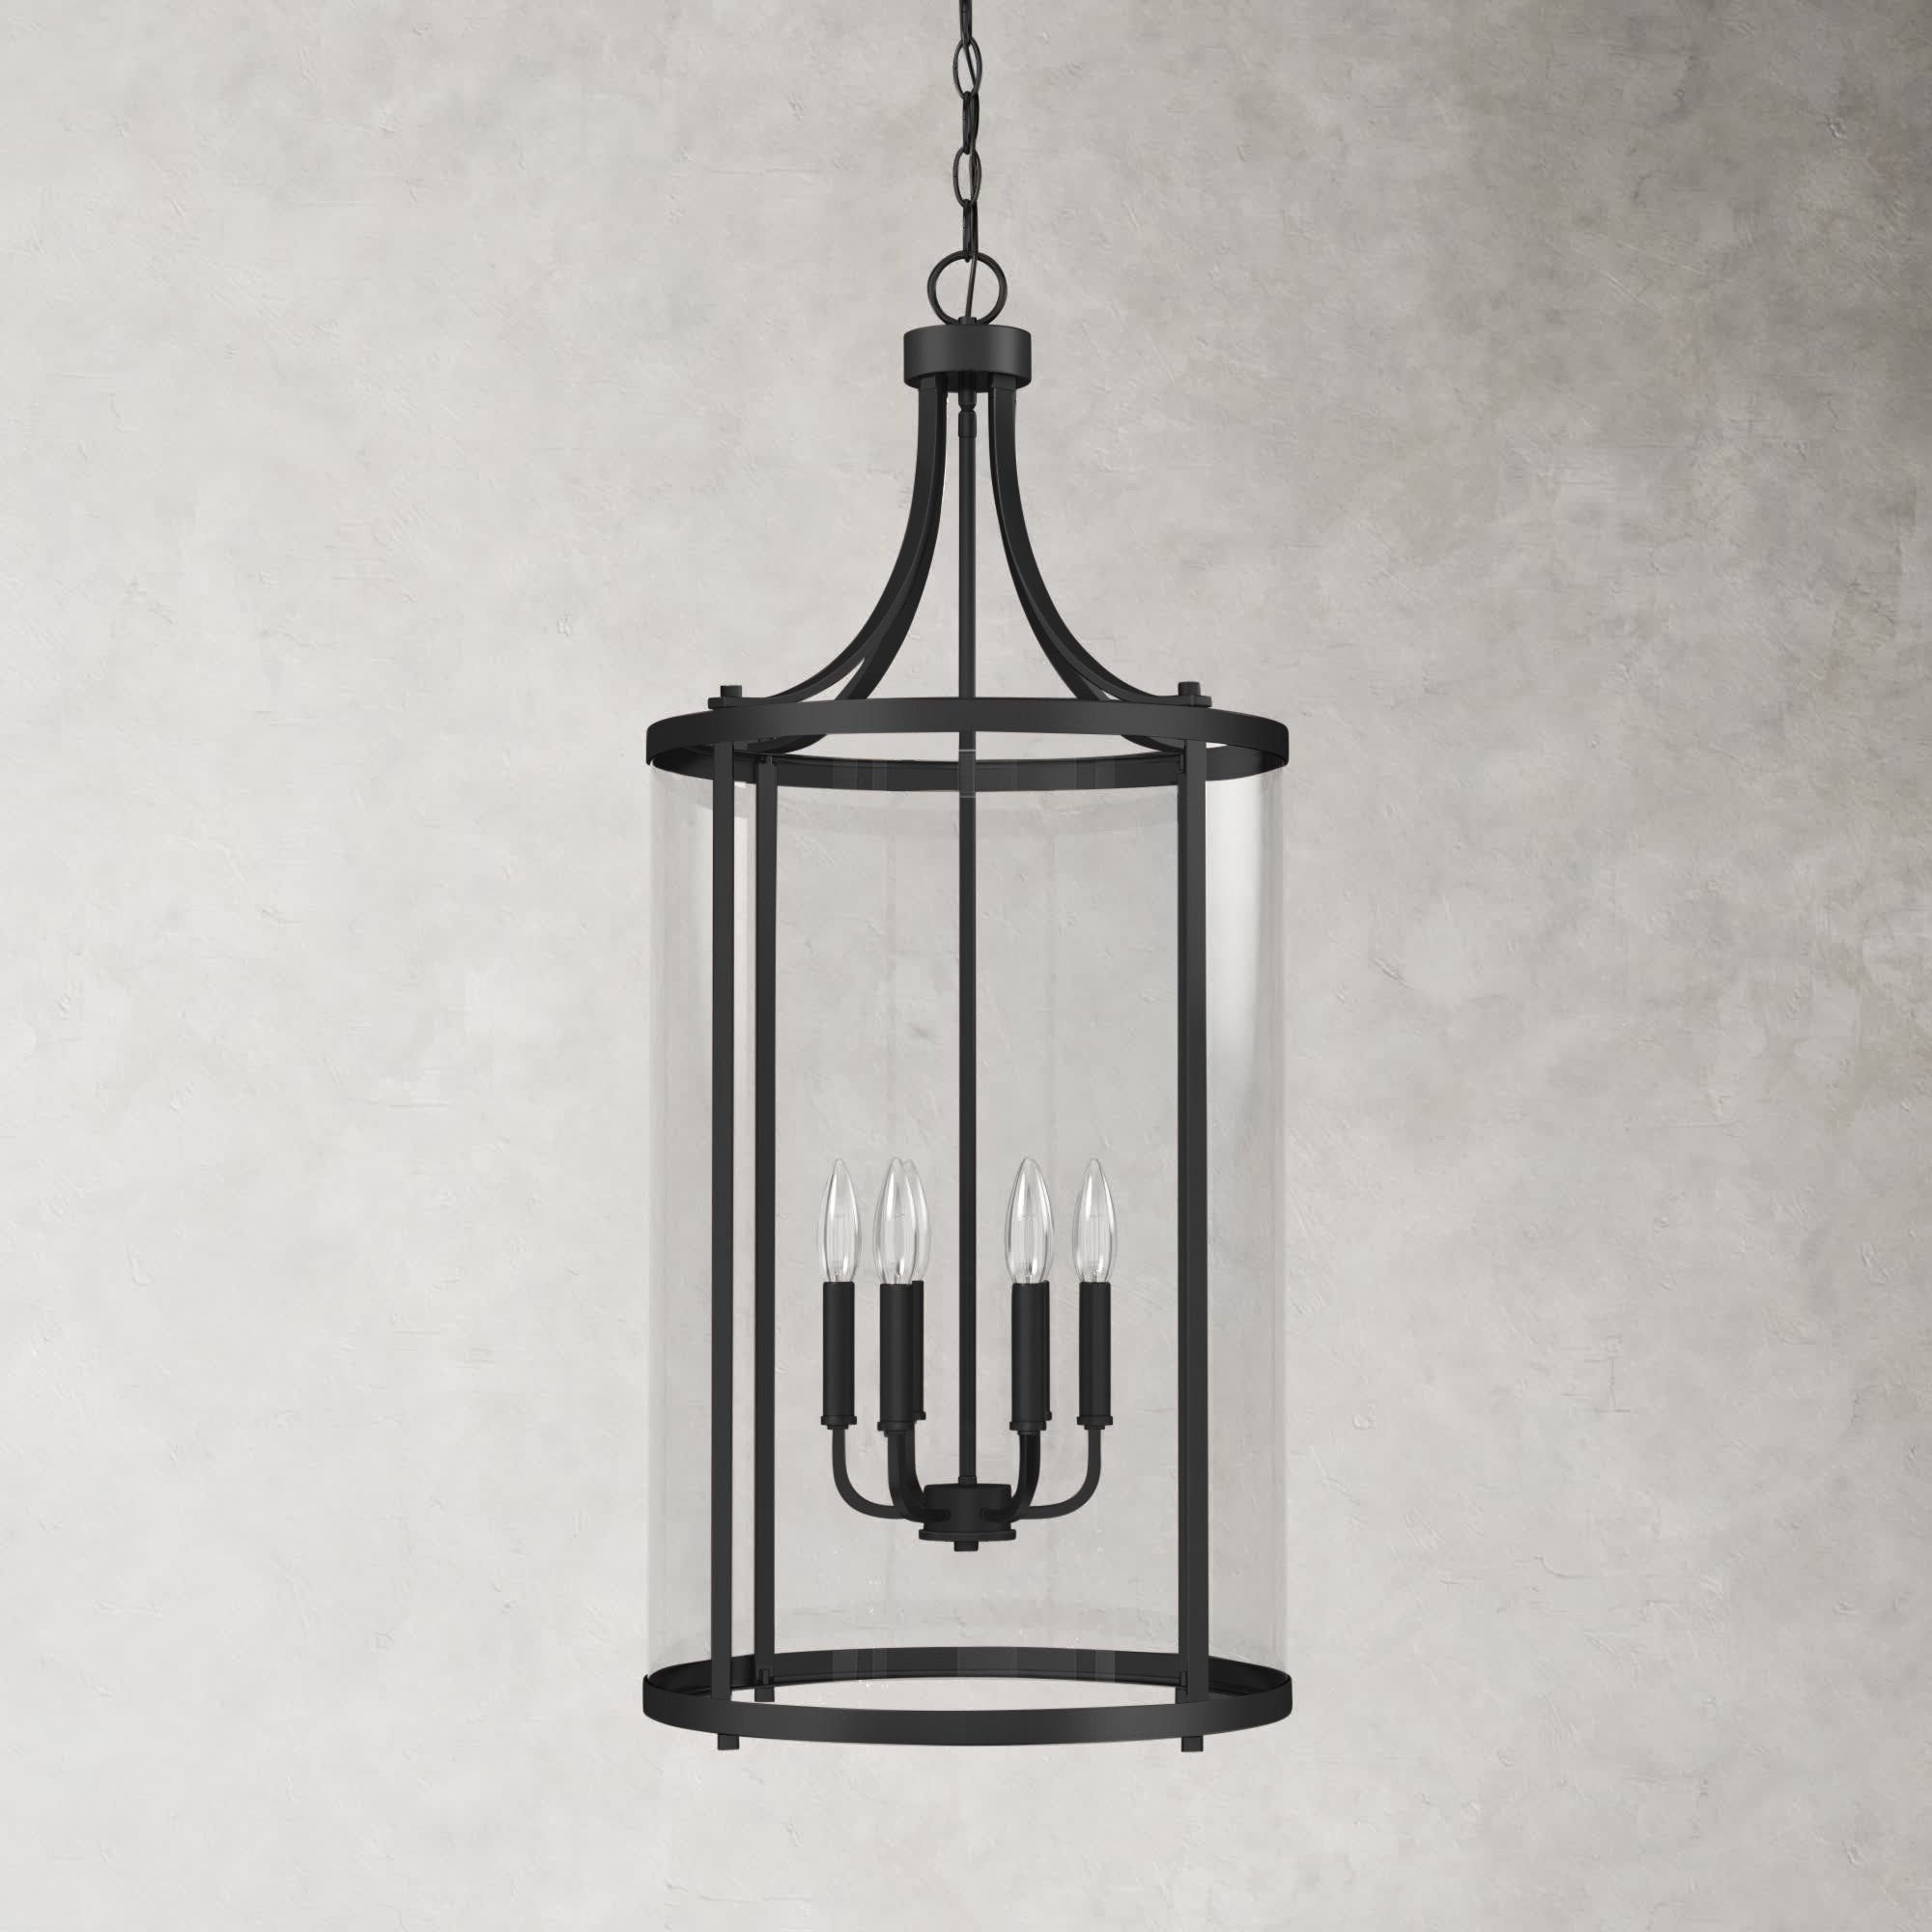 Wayfair With Most Recent Six Light Lantern Chandeliers (View 2 of 15)